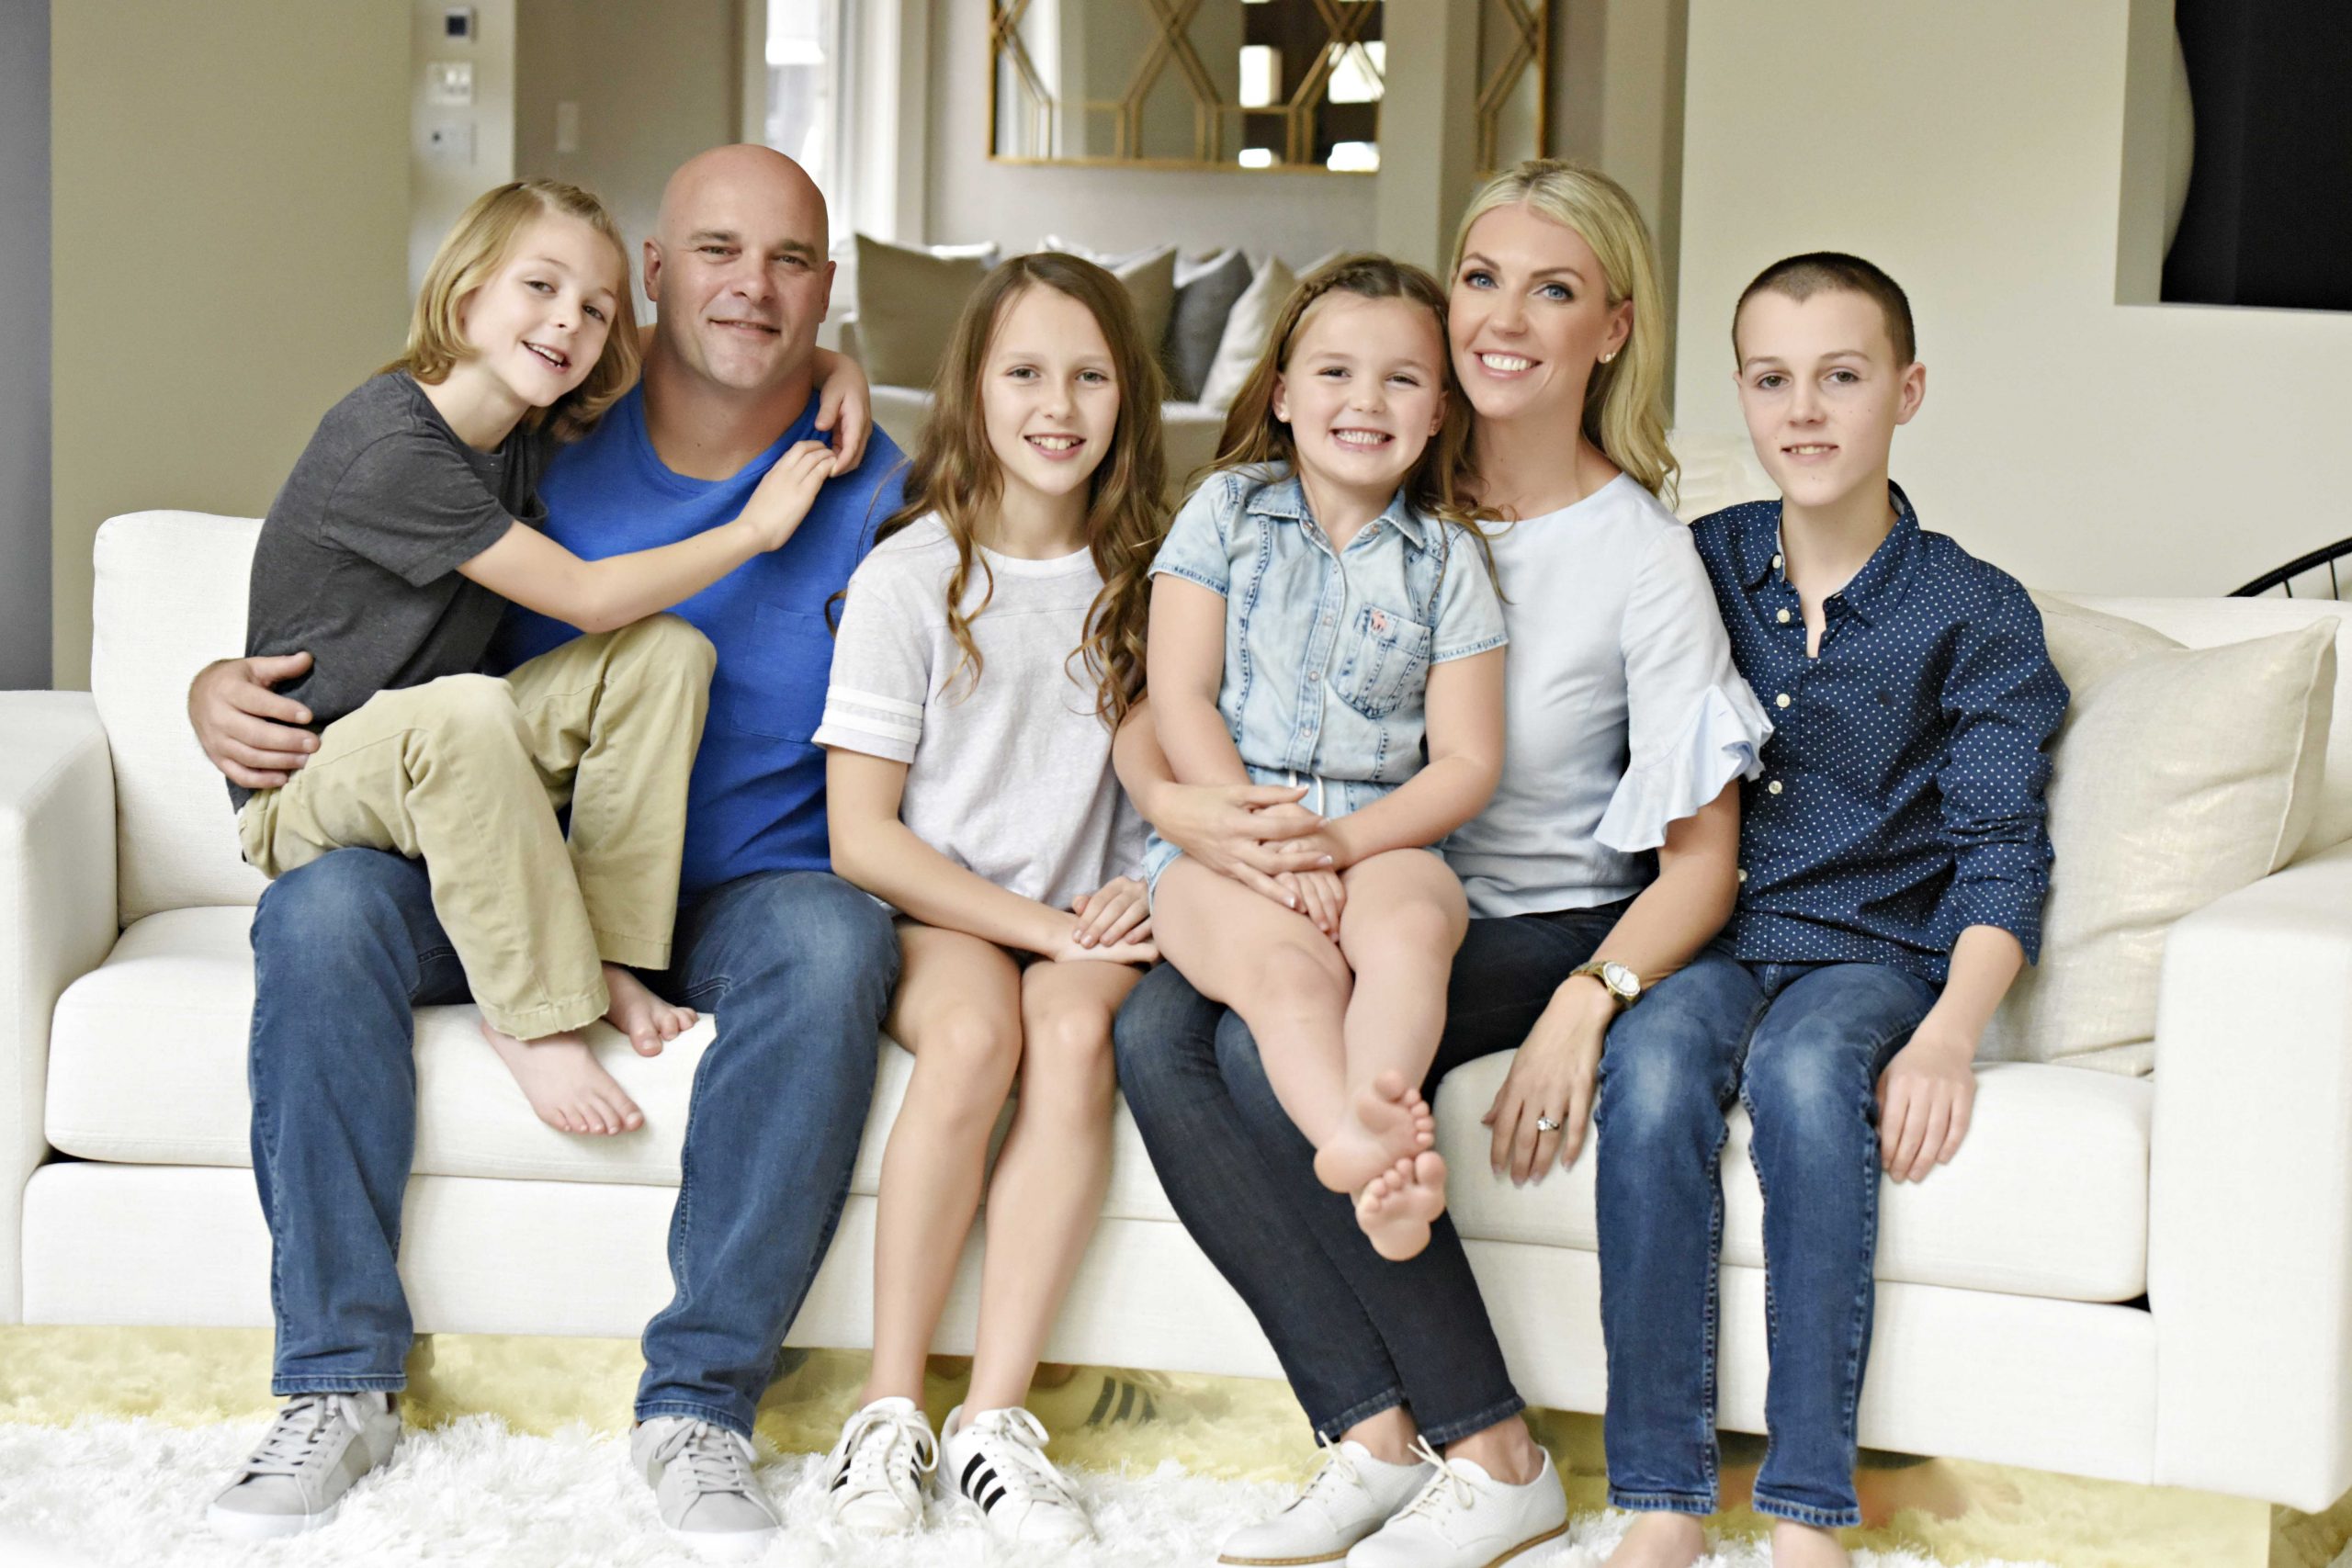 A perfect family photo of Bryan and Sarah Baeumler with their four kids; Lincoln, Charlotte, JoJo and Quintyn.